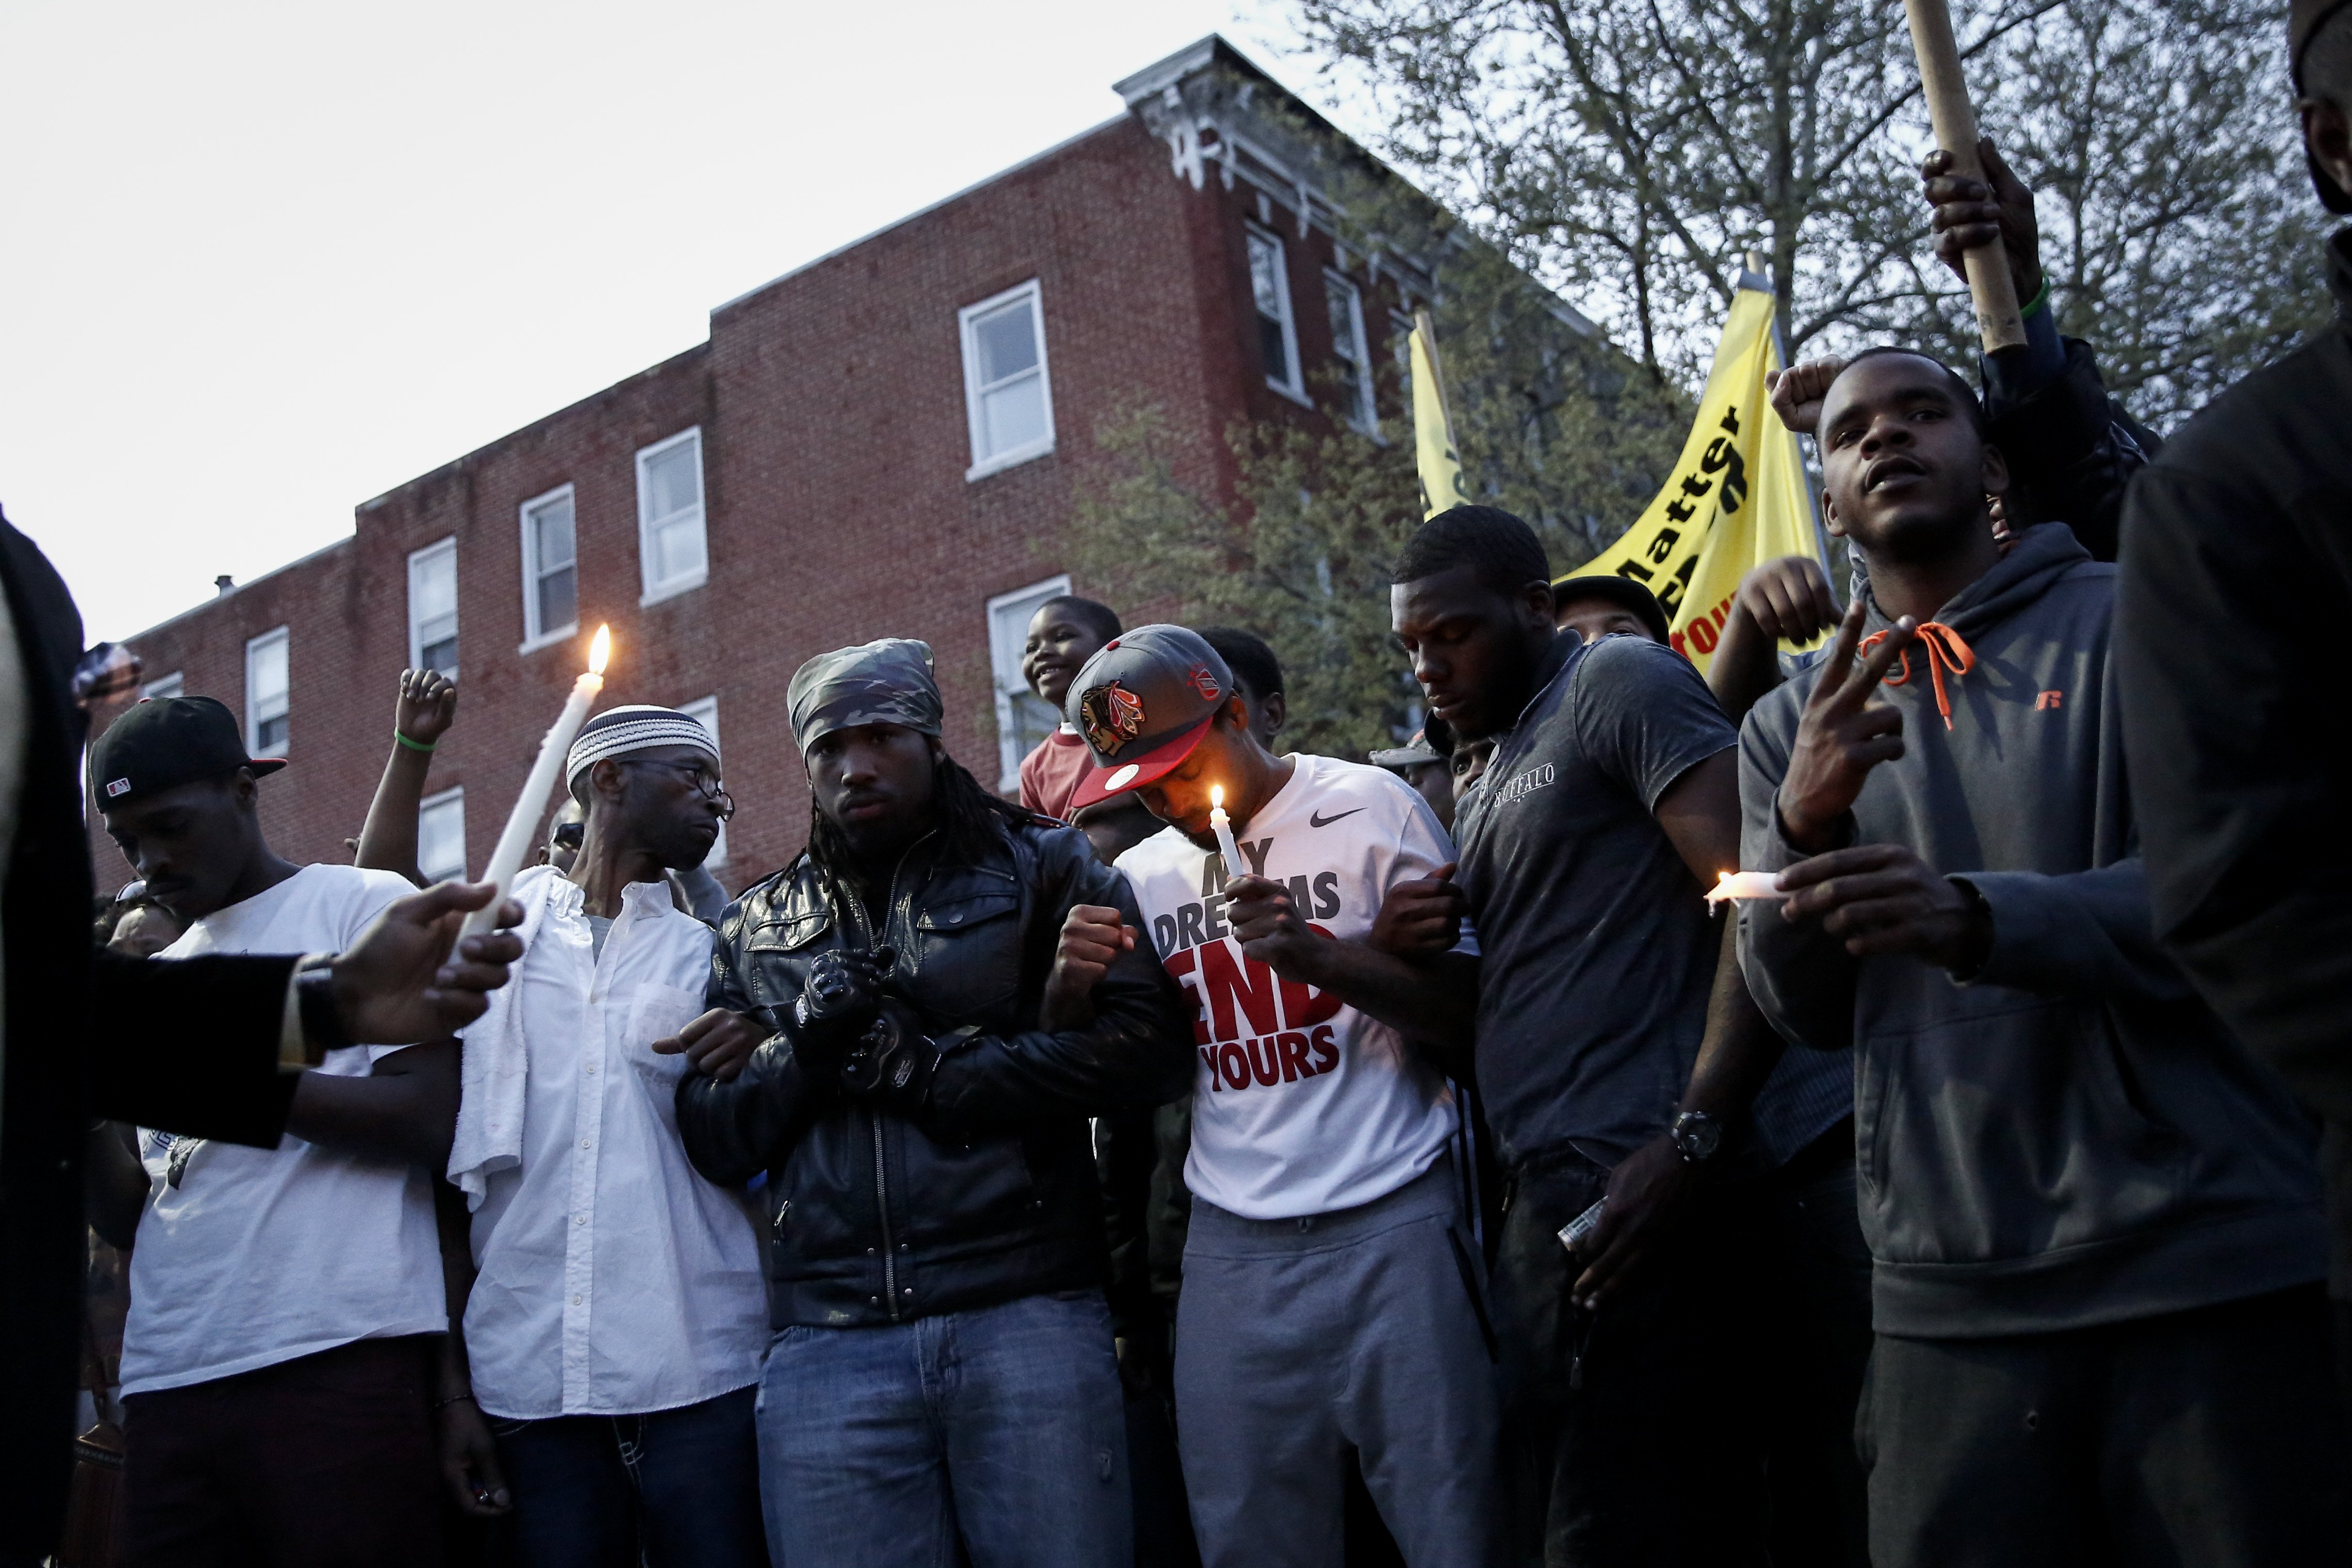 Protestors participate in a vigil for Freddie Gray down the street from the Baltimore Police Department's Western District police station in Baltimore on April 21, 2015.